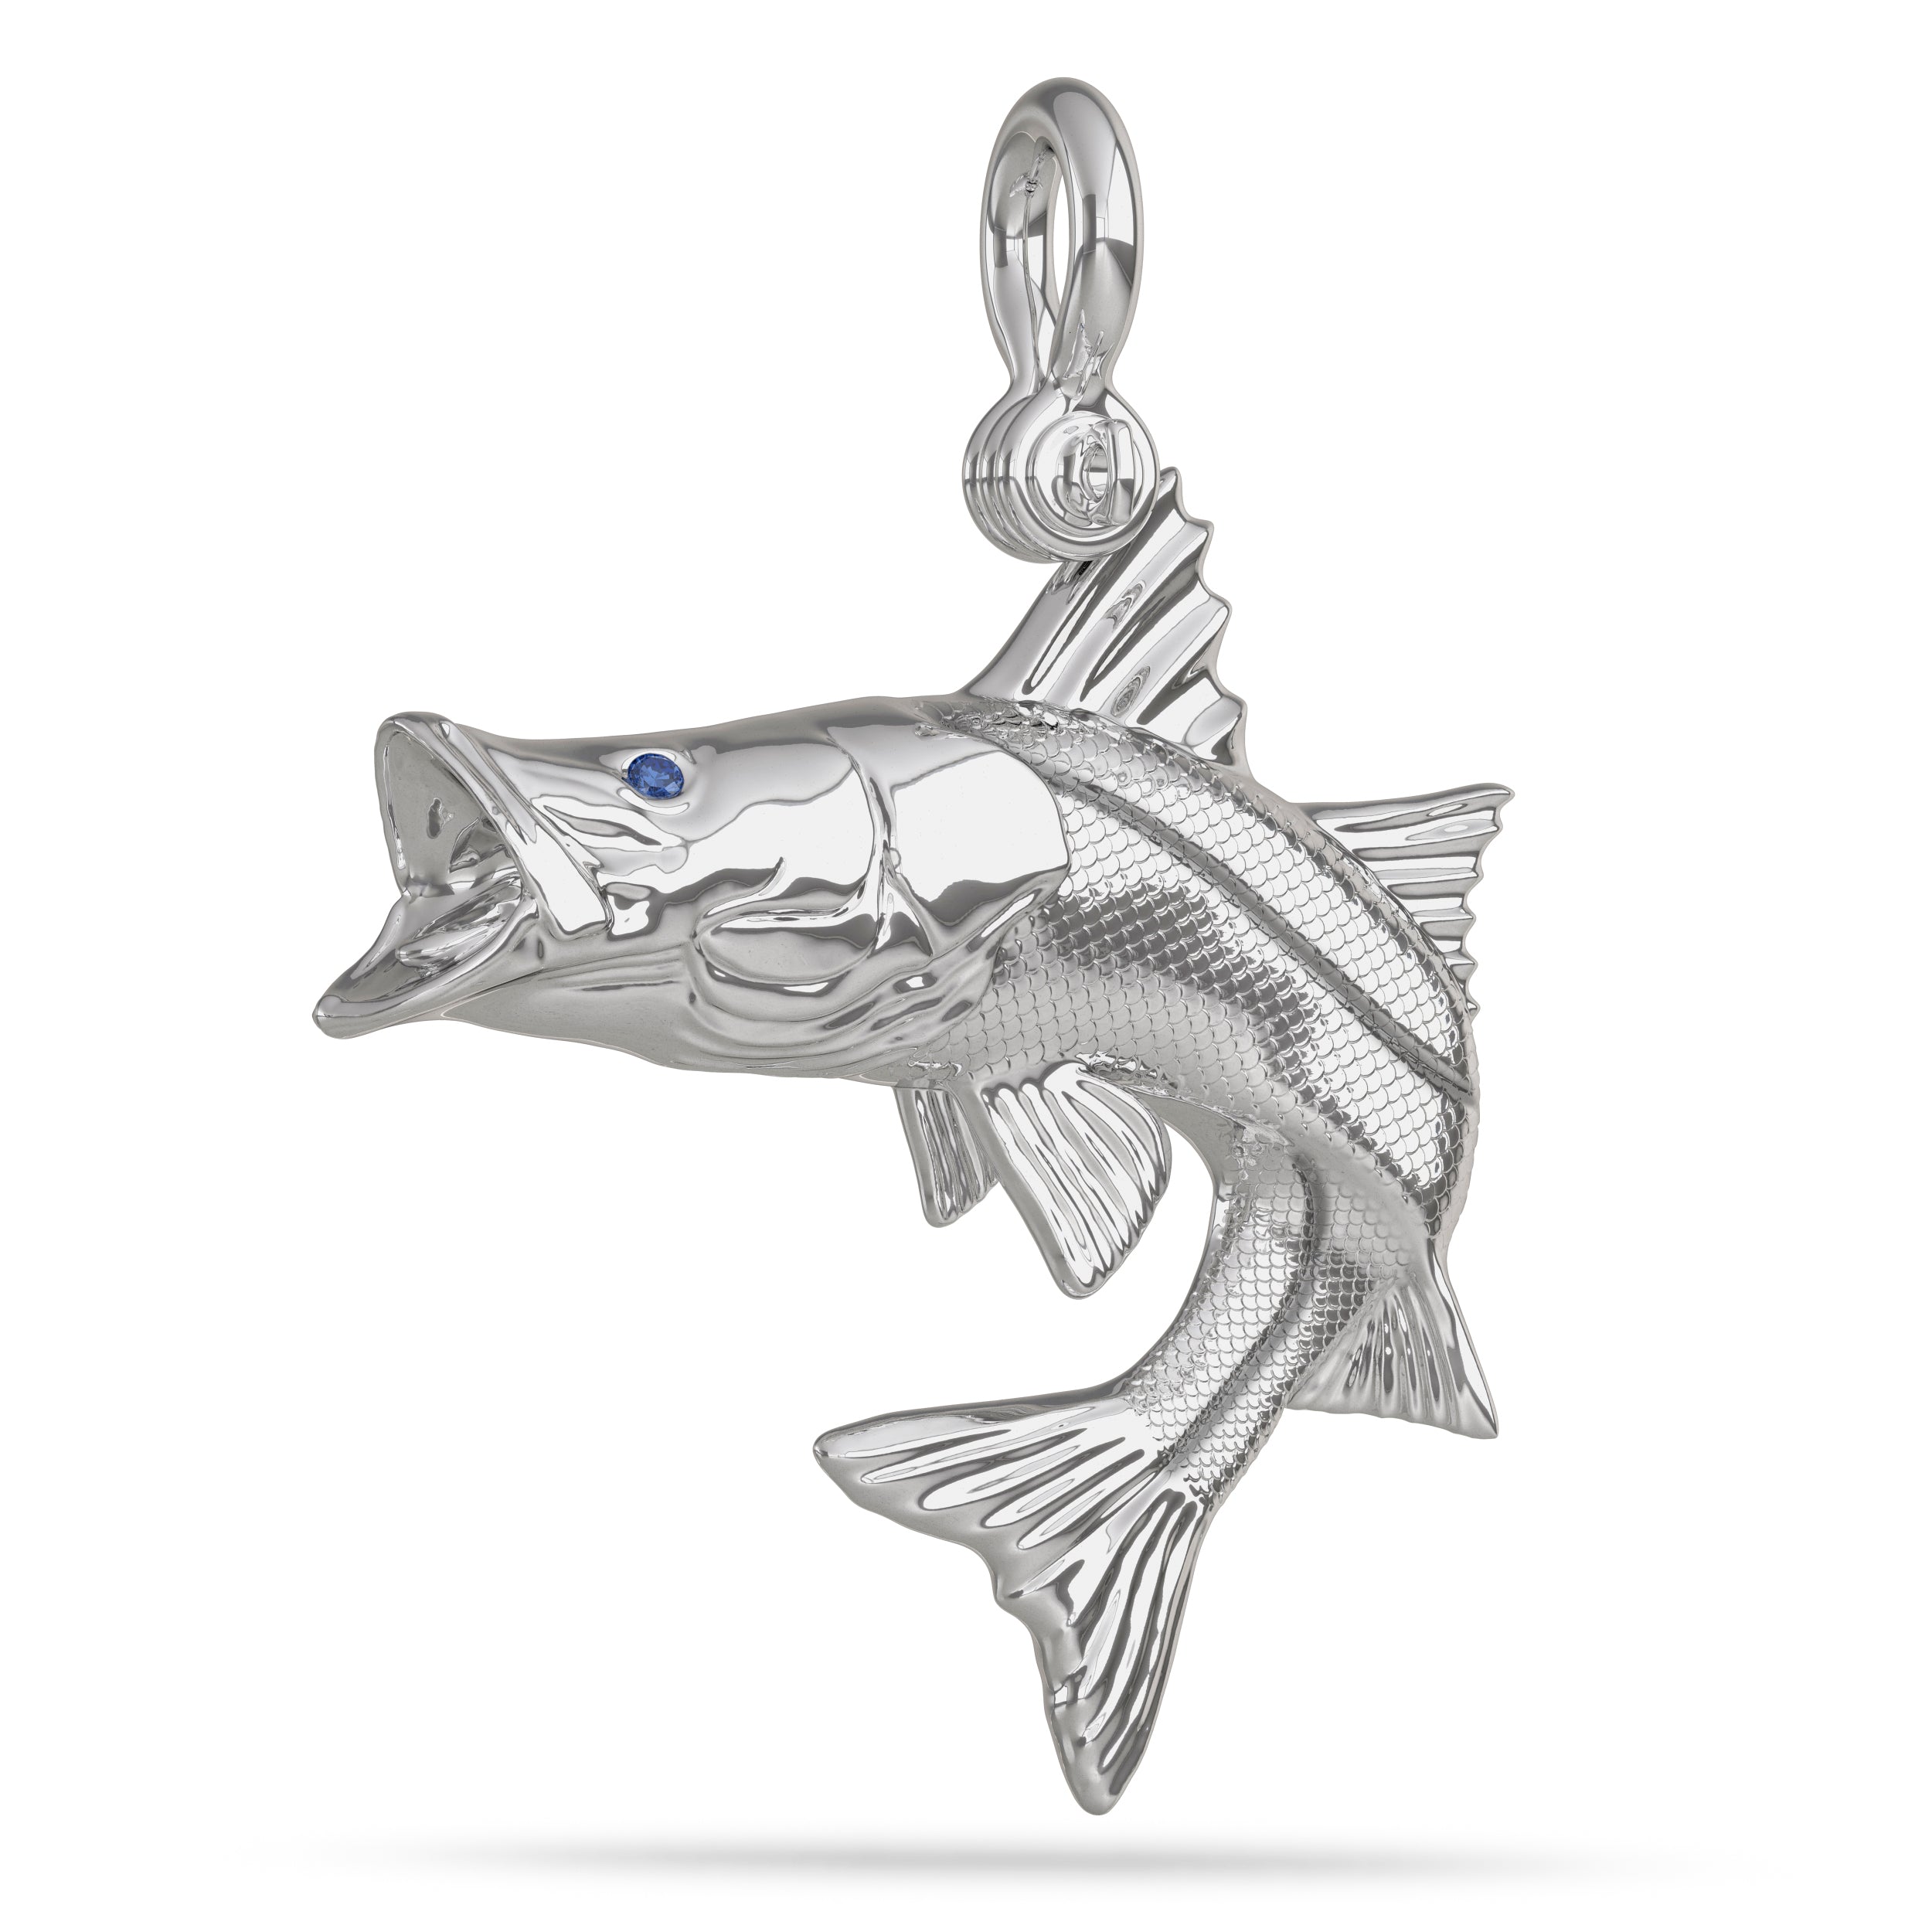 Snook In Action - Silver / Mouth Open / Small (28mm)